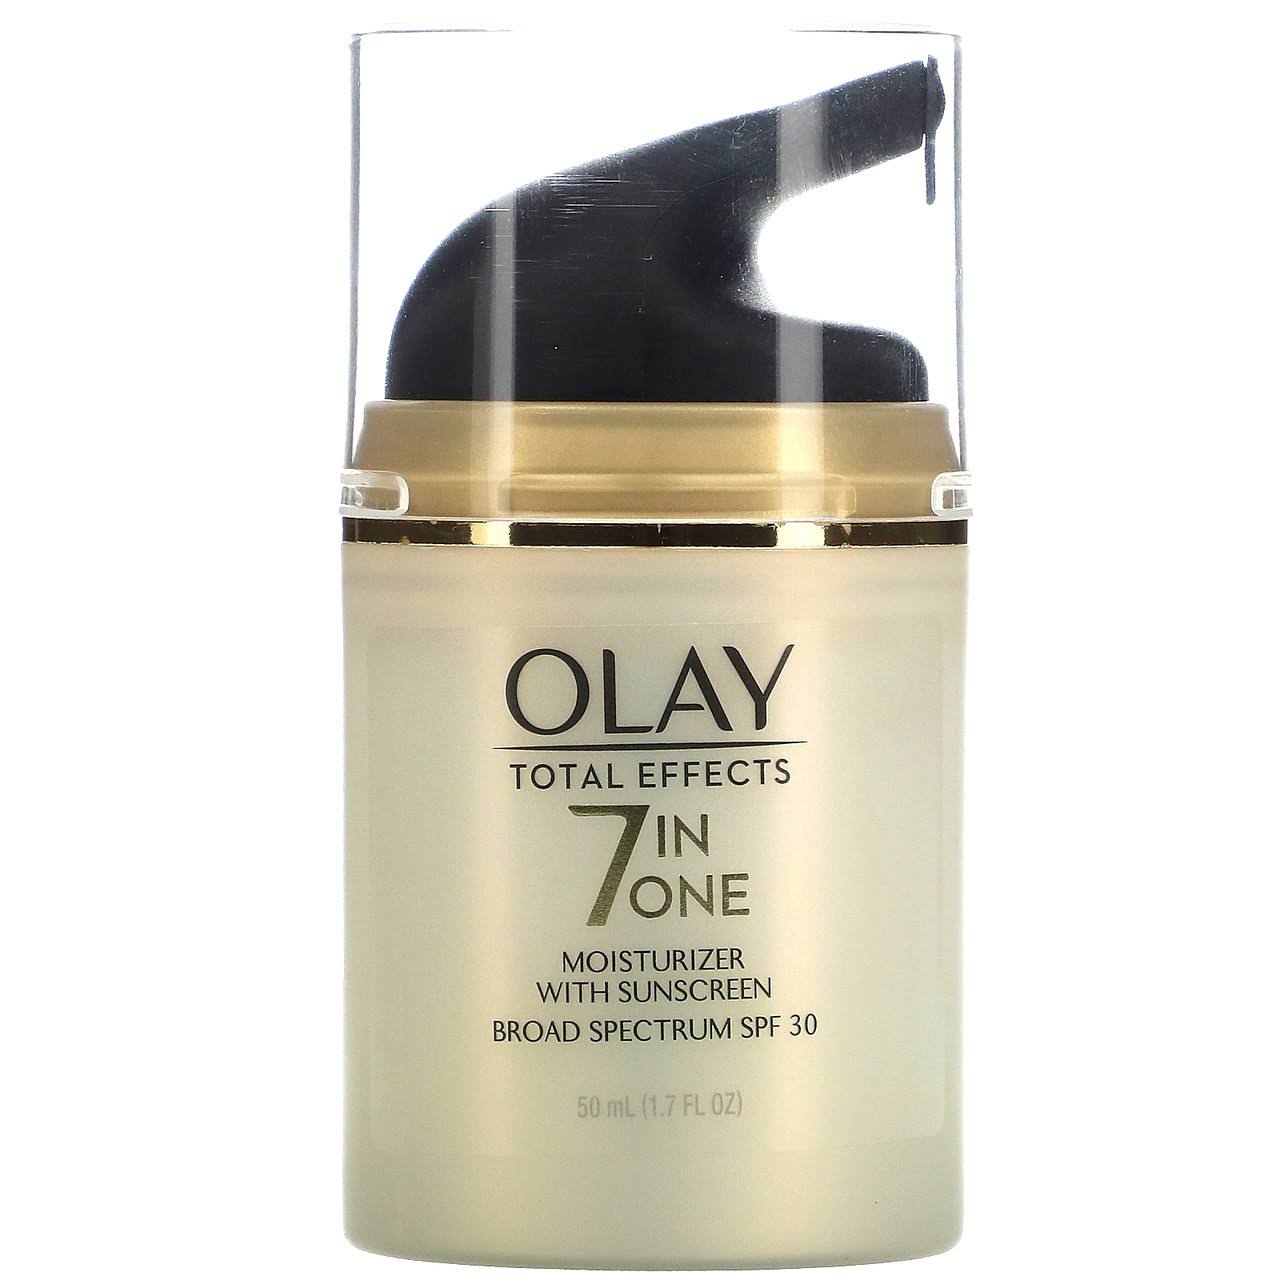 Olay Total Effects 7 in One Anti-aging Moisturizer - SPF 30, 1.7oz